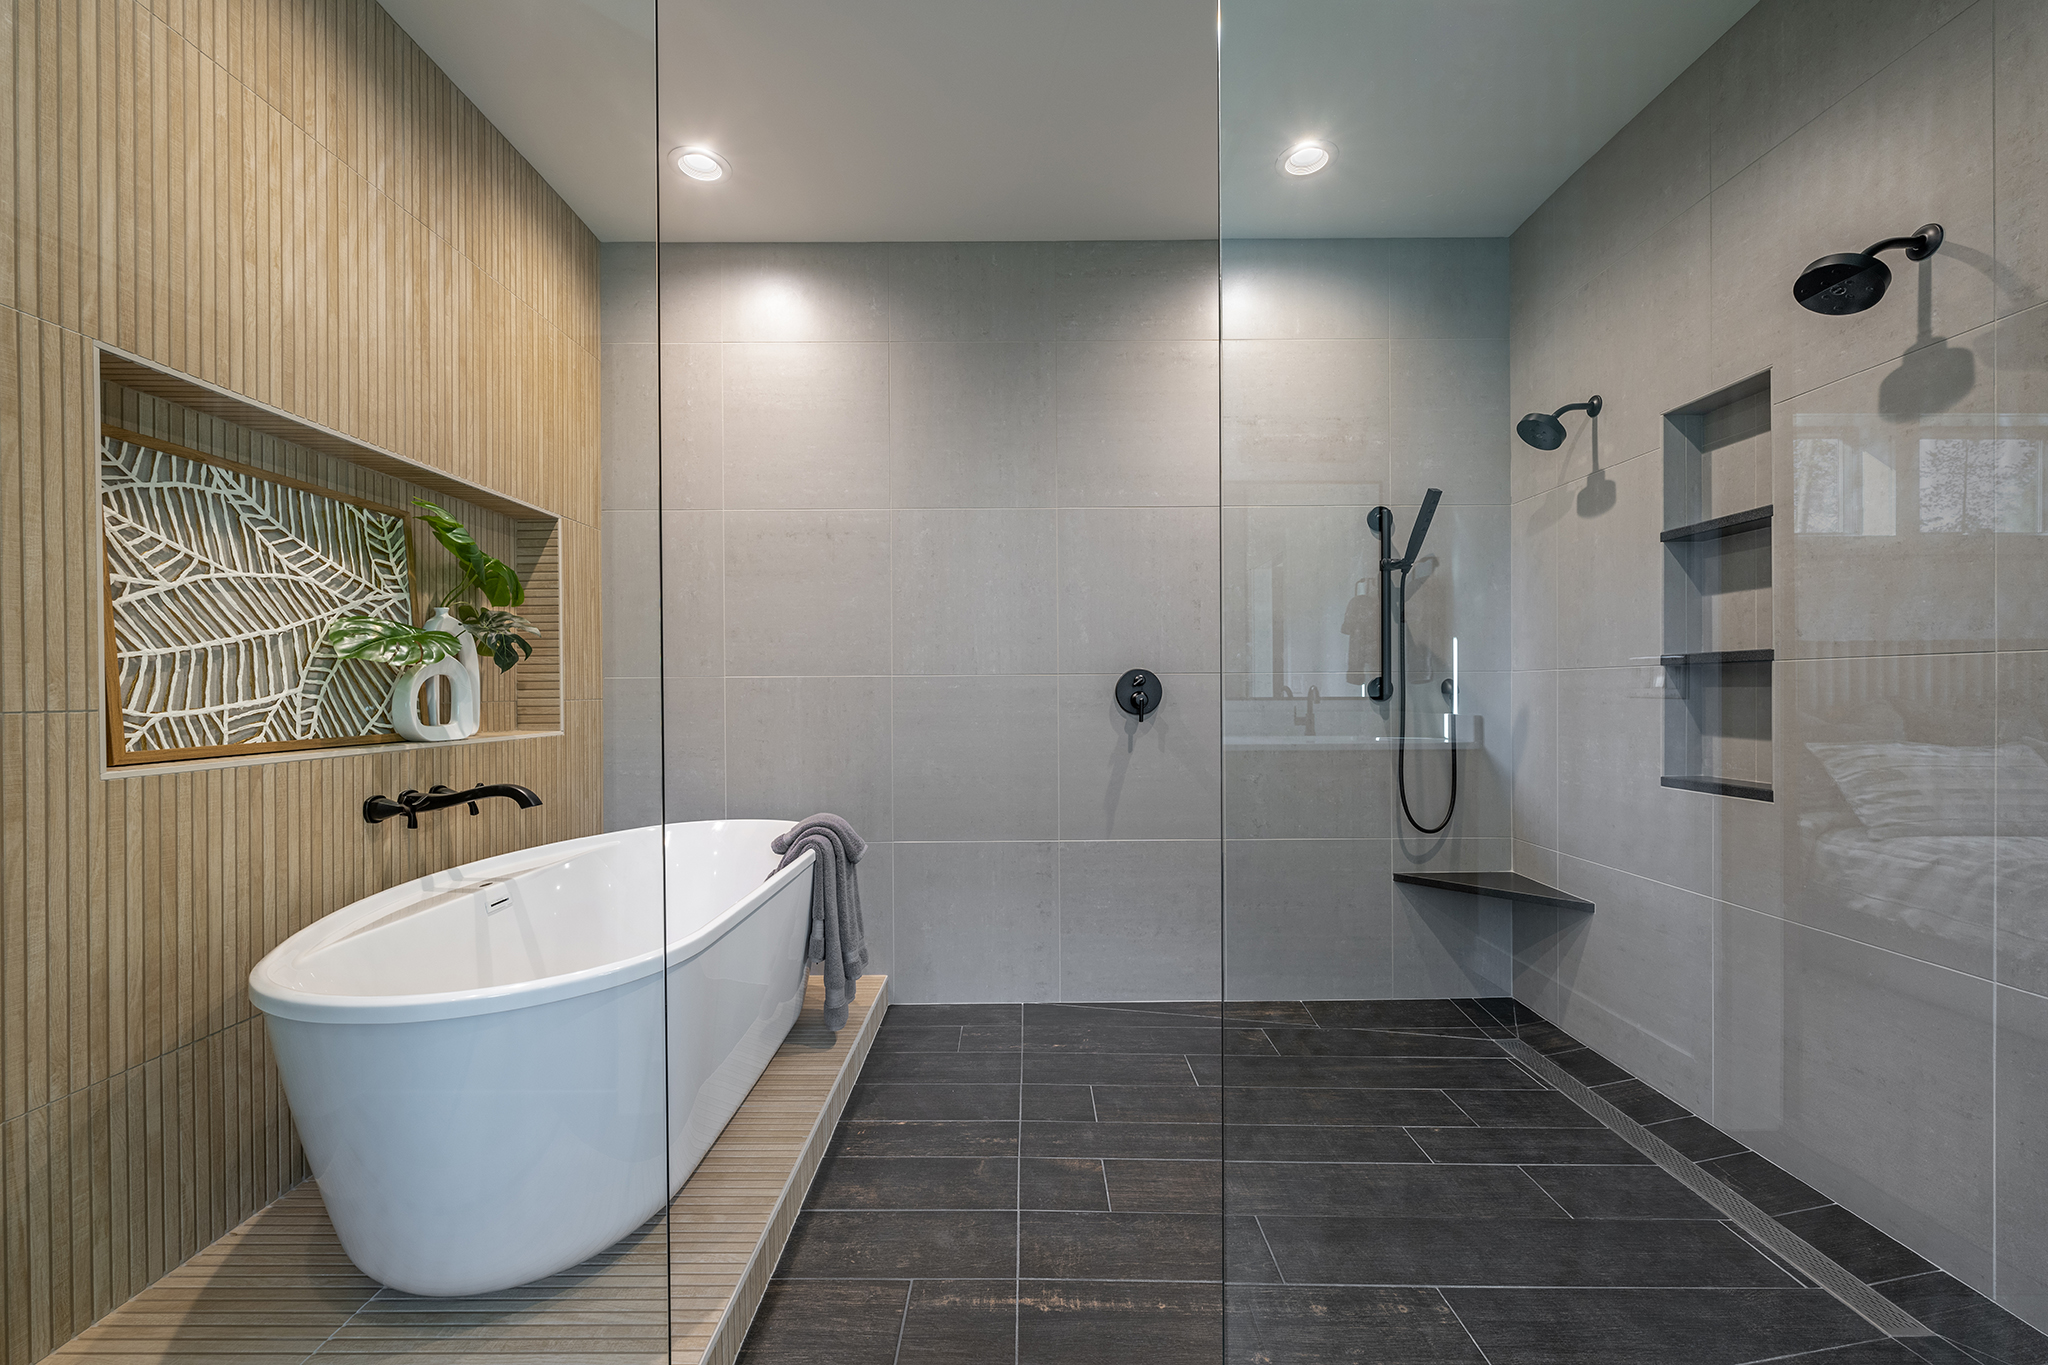 A large soaking tub and a series of shower heads can provide a relaxing experience in the master bedroom